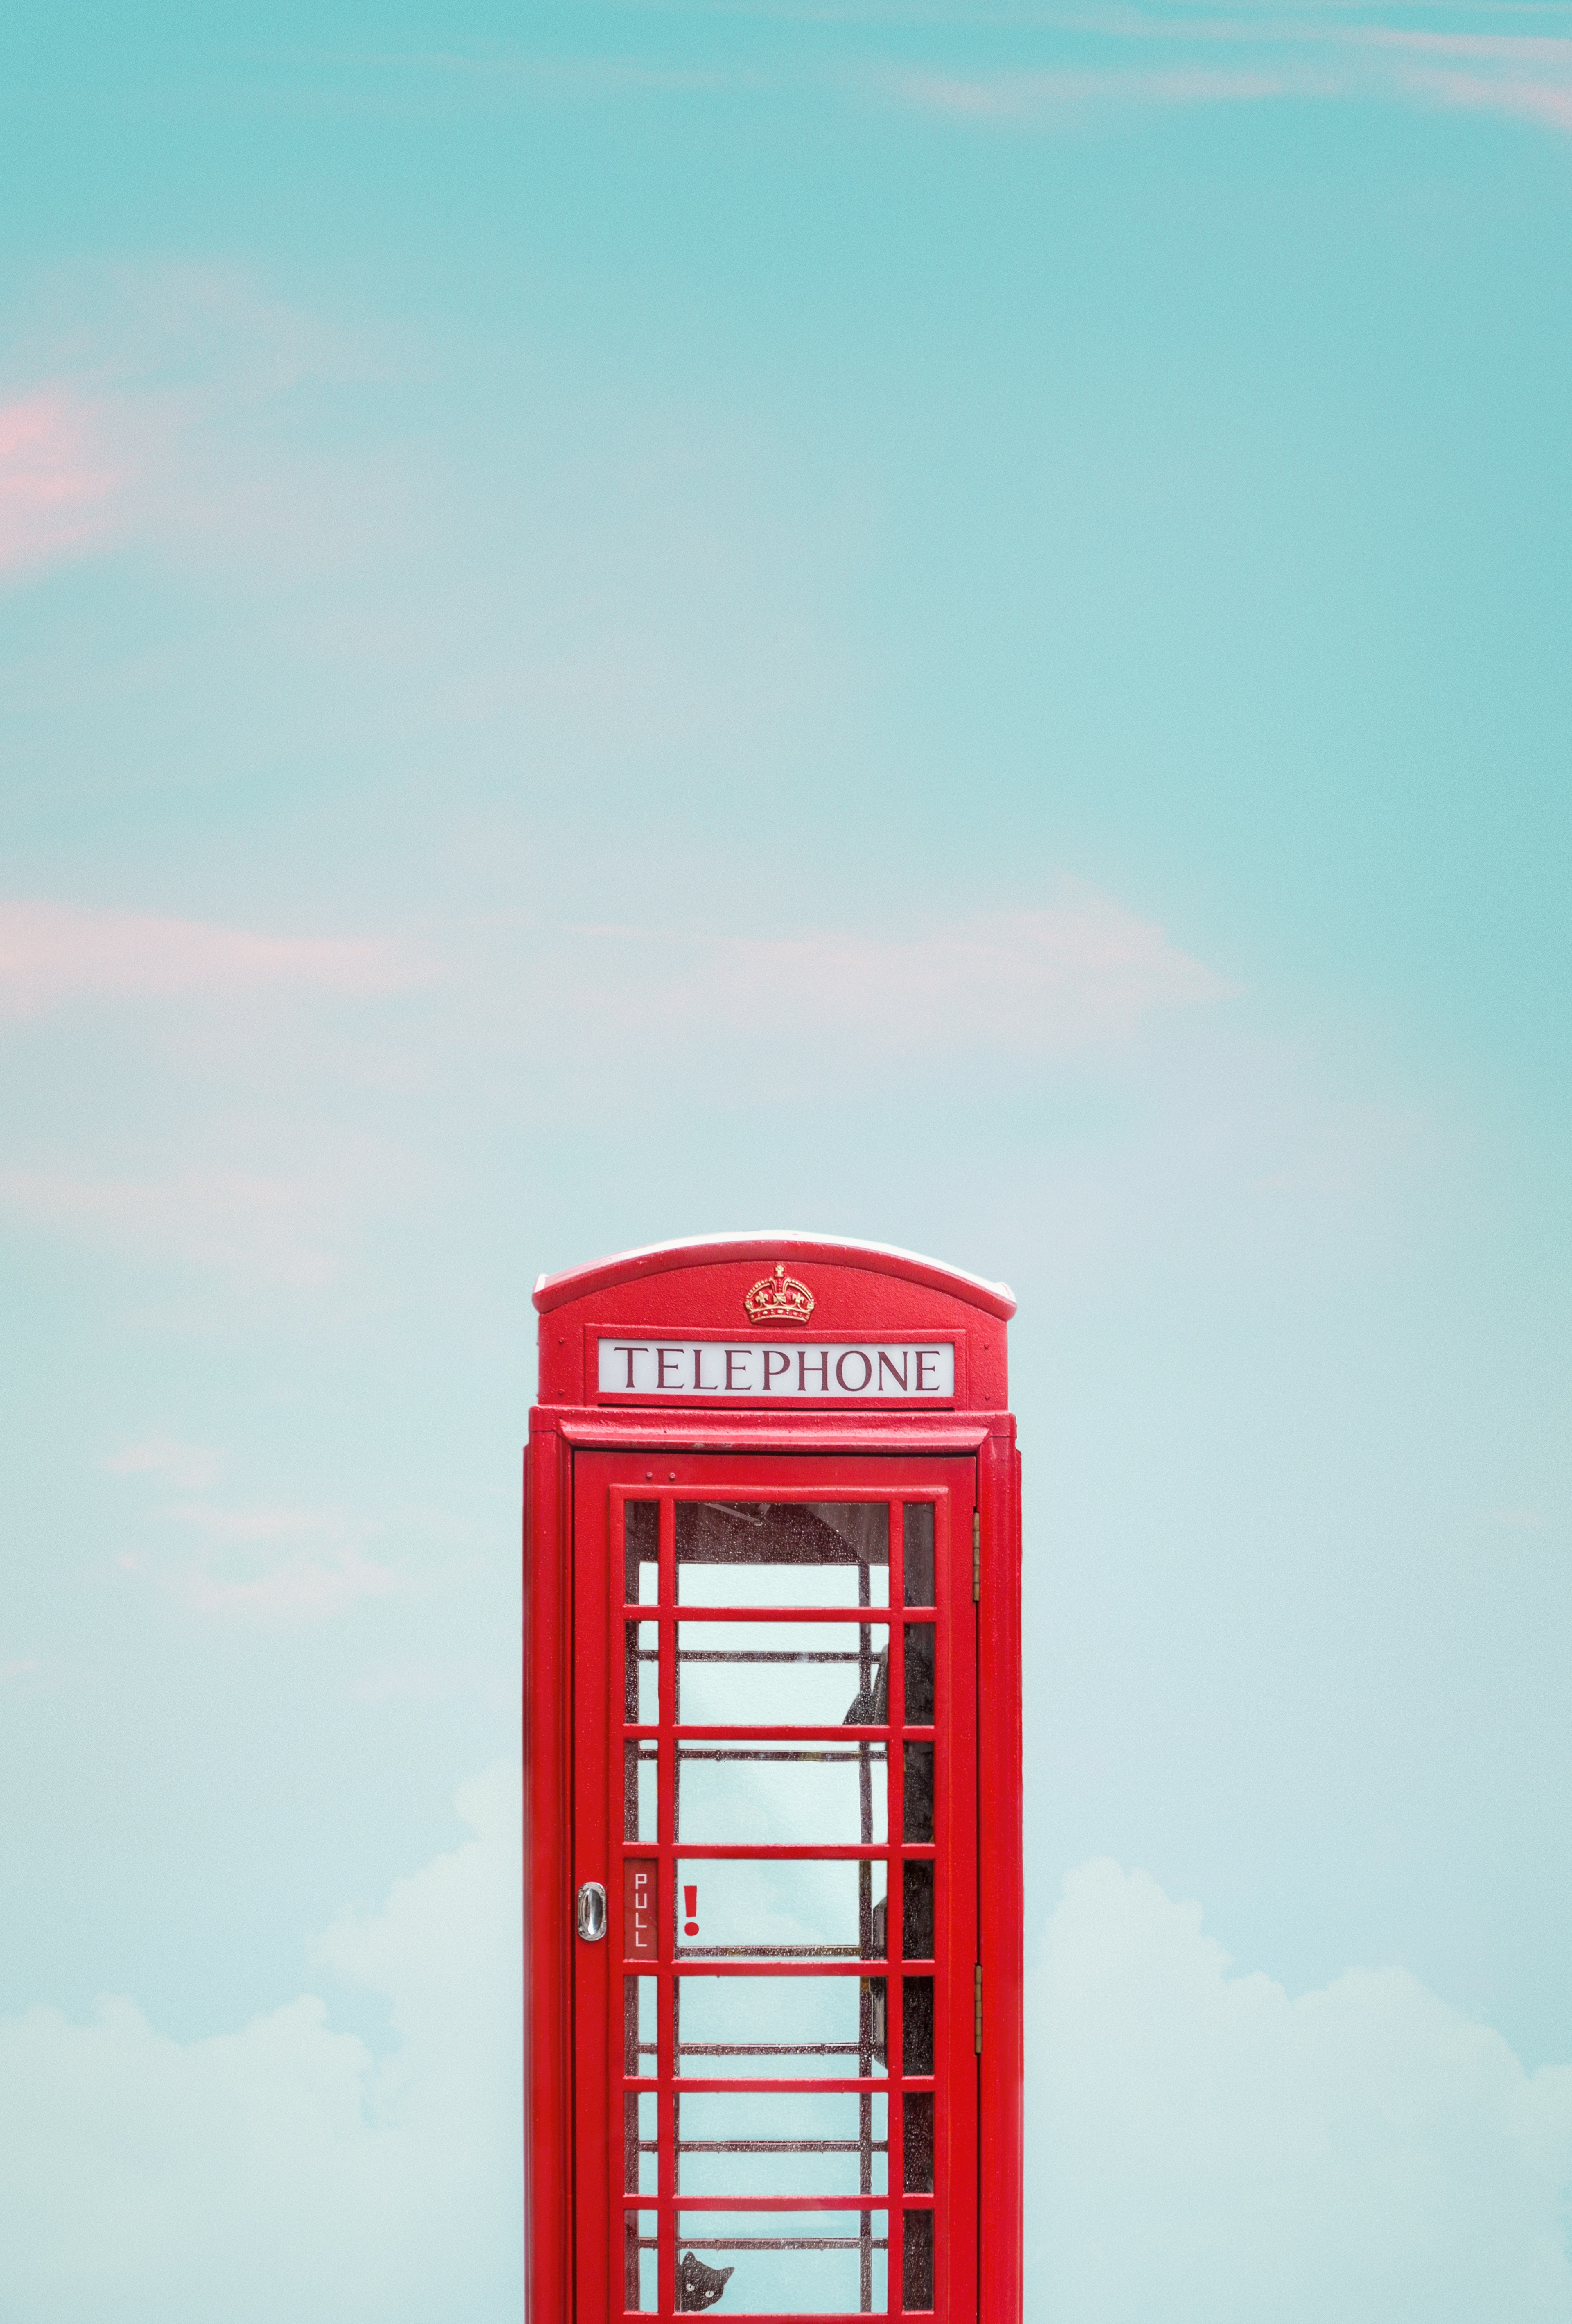 Phone booth photos download the best free phone booth stock photos hd images